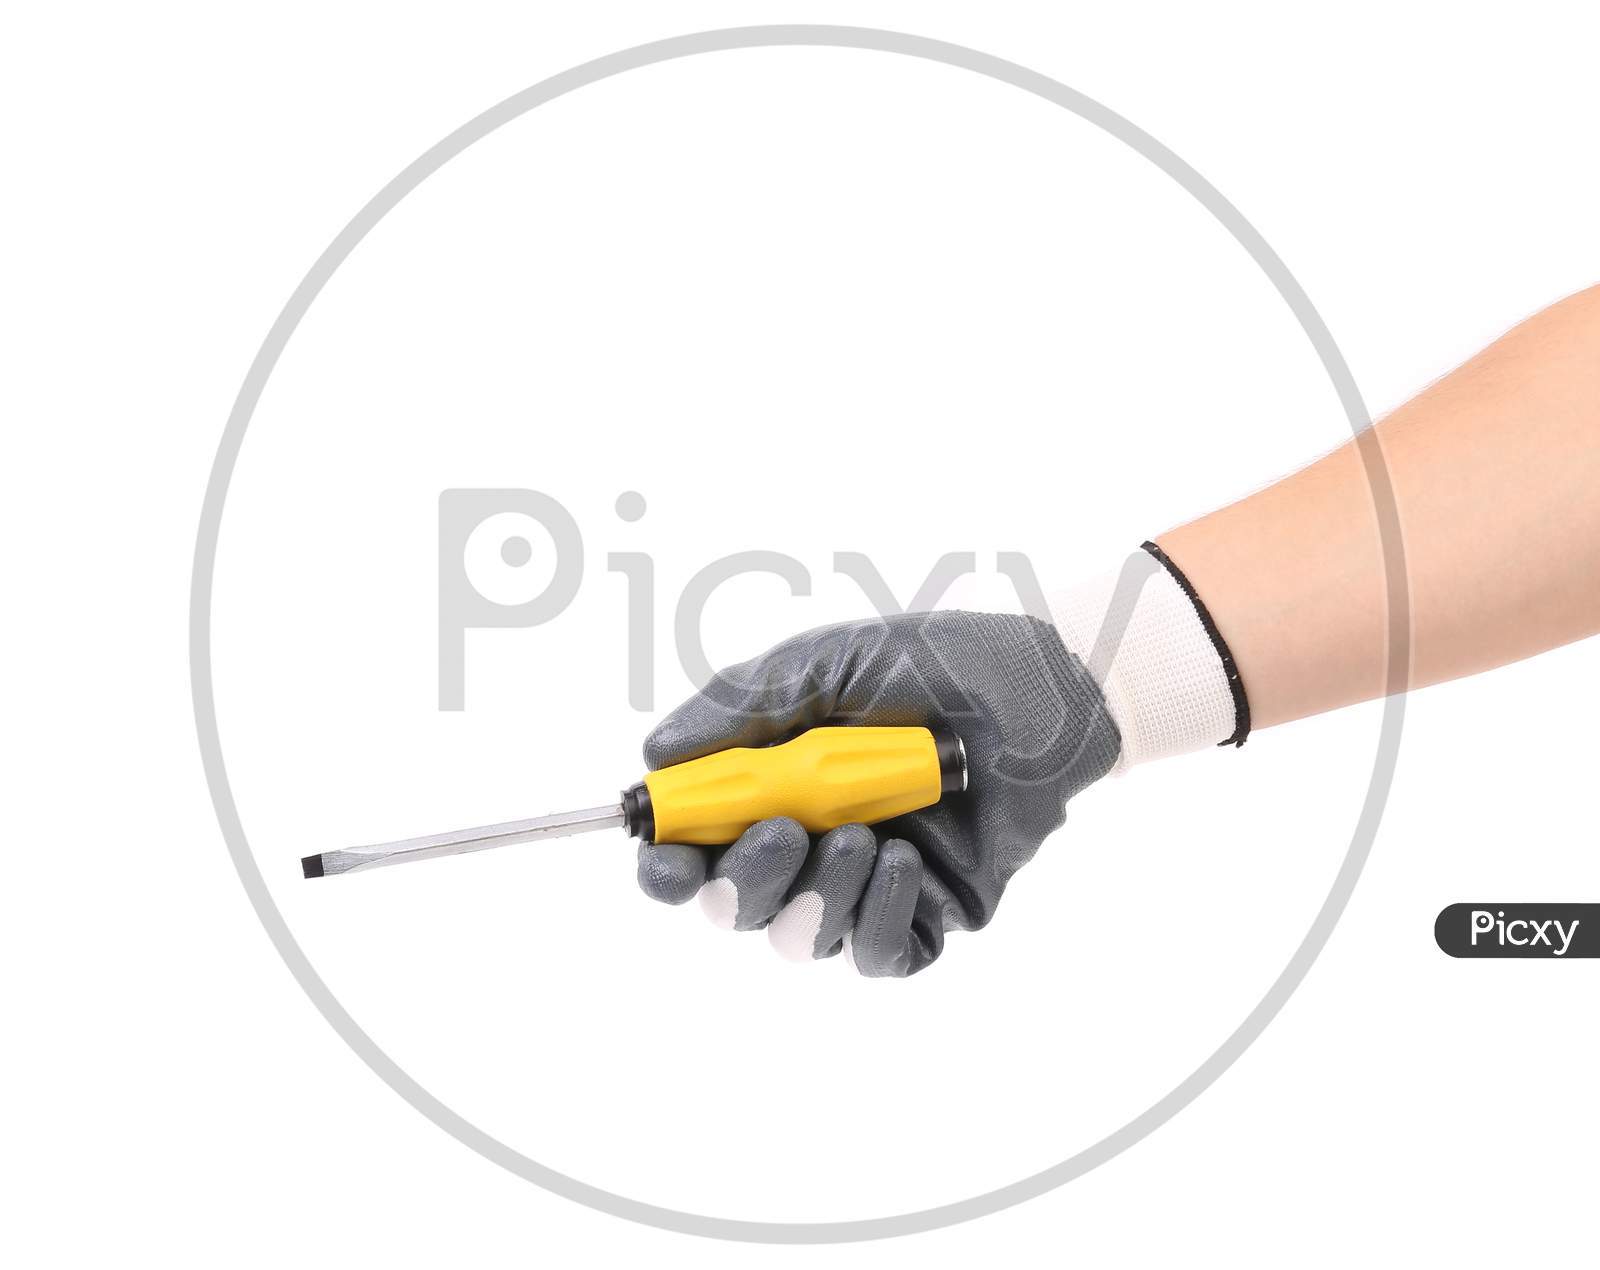 Hand In Glove Holding Screwdriver. Isolated On A White Background